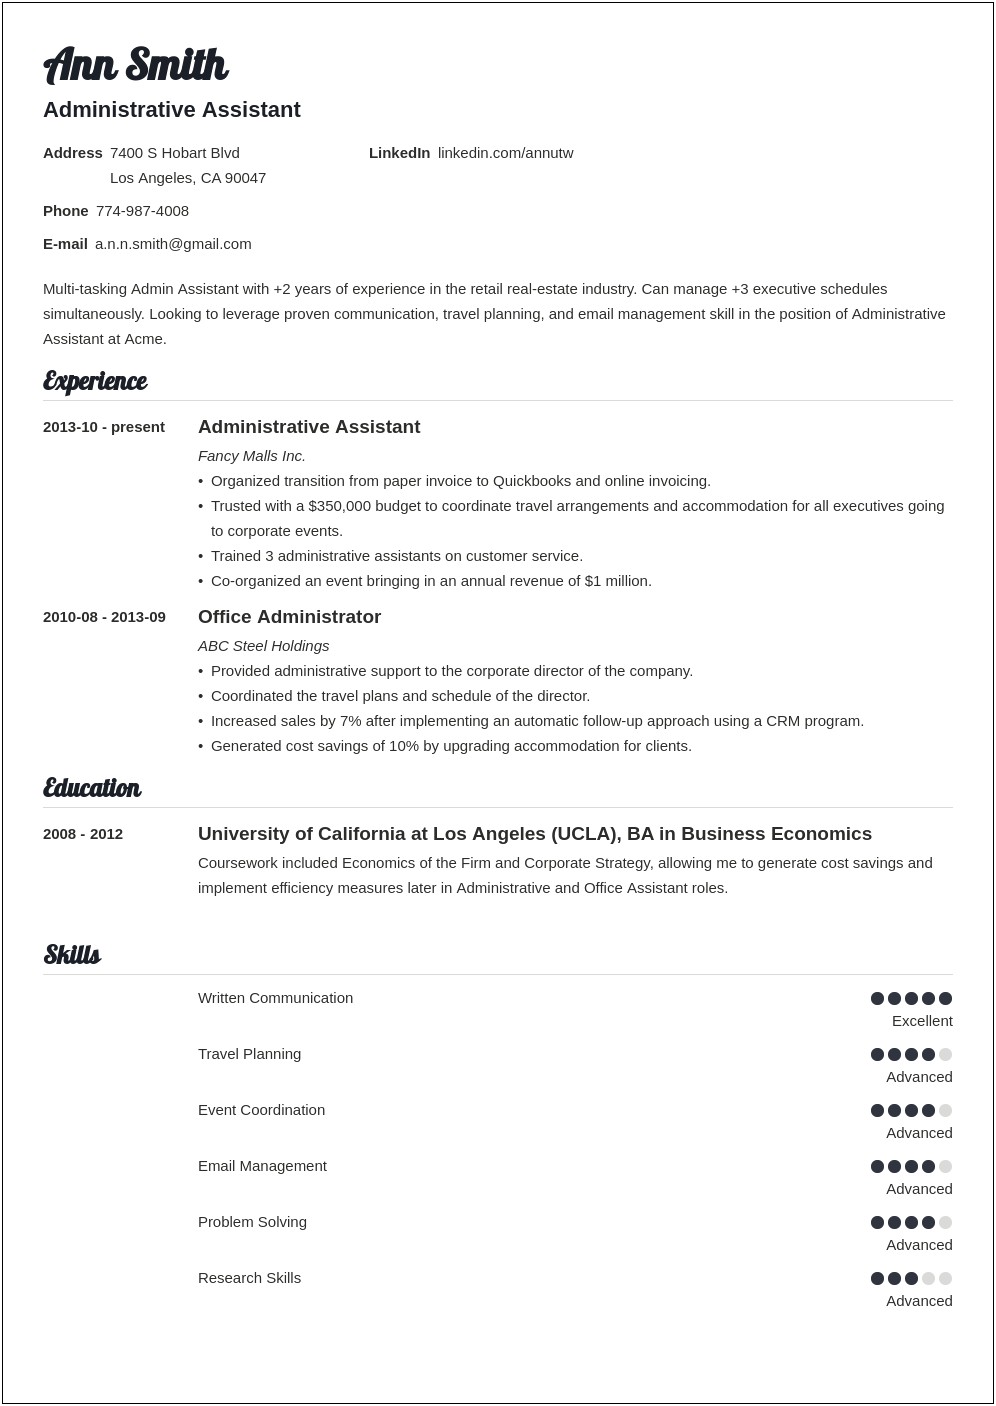 Resume Summary Examples For Executive Assistant